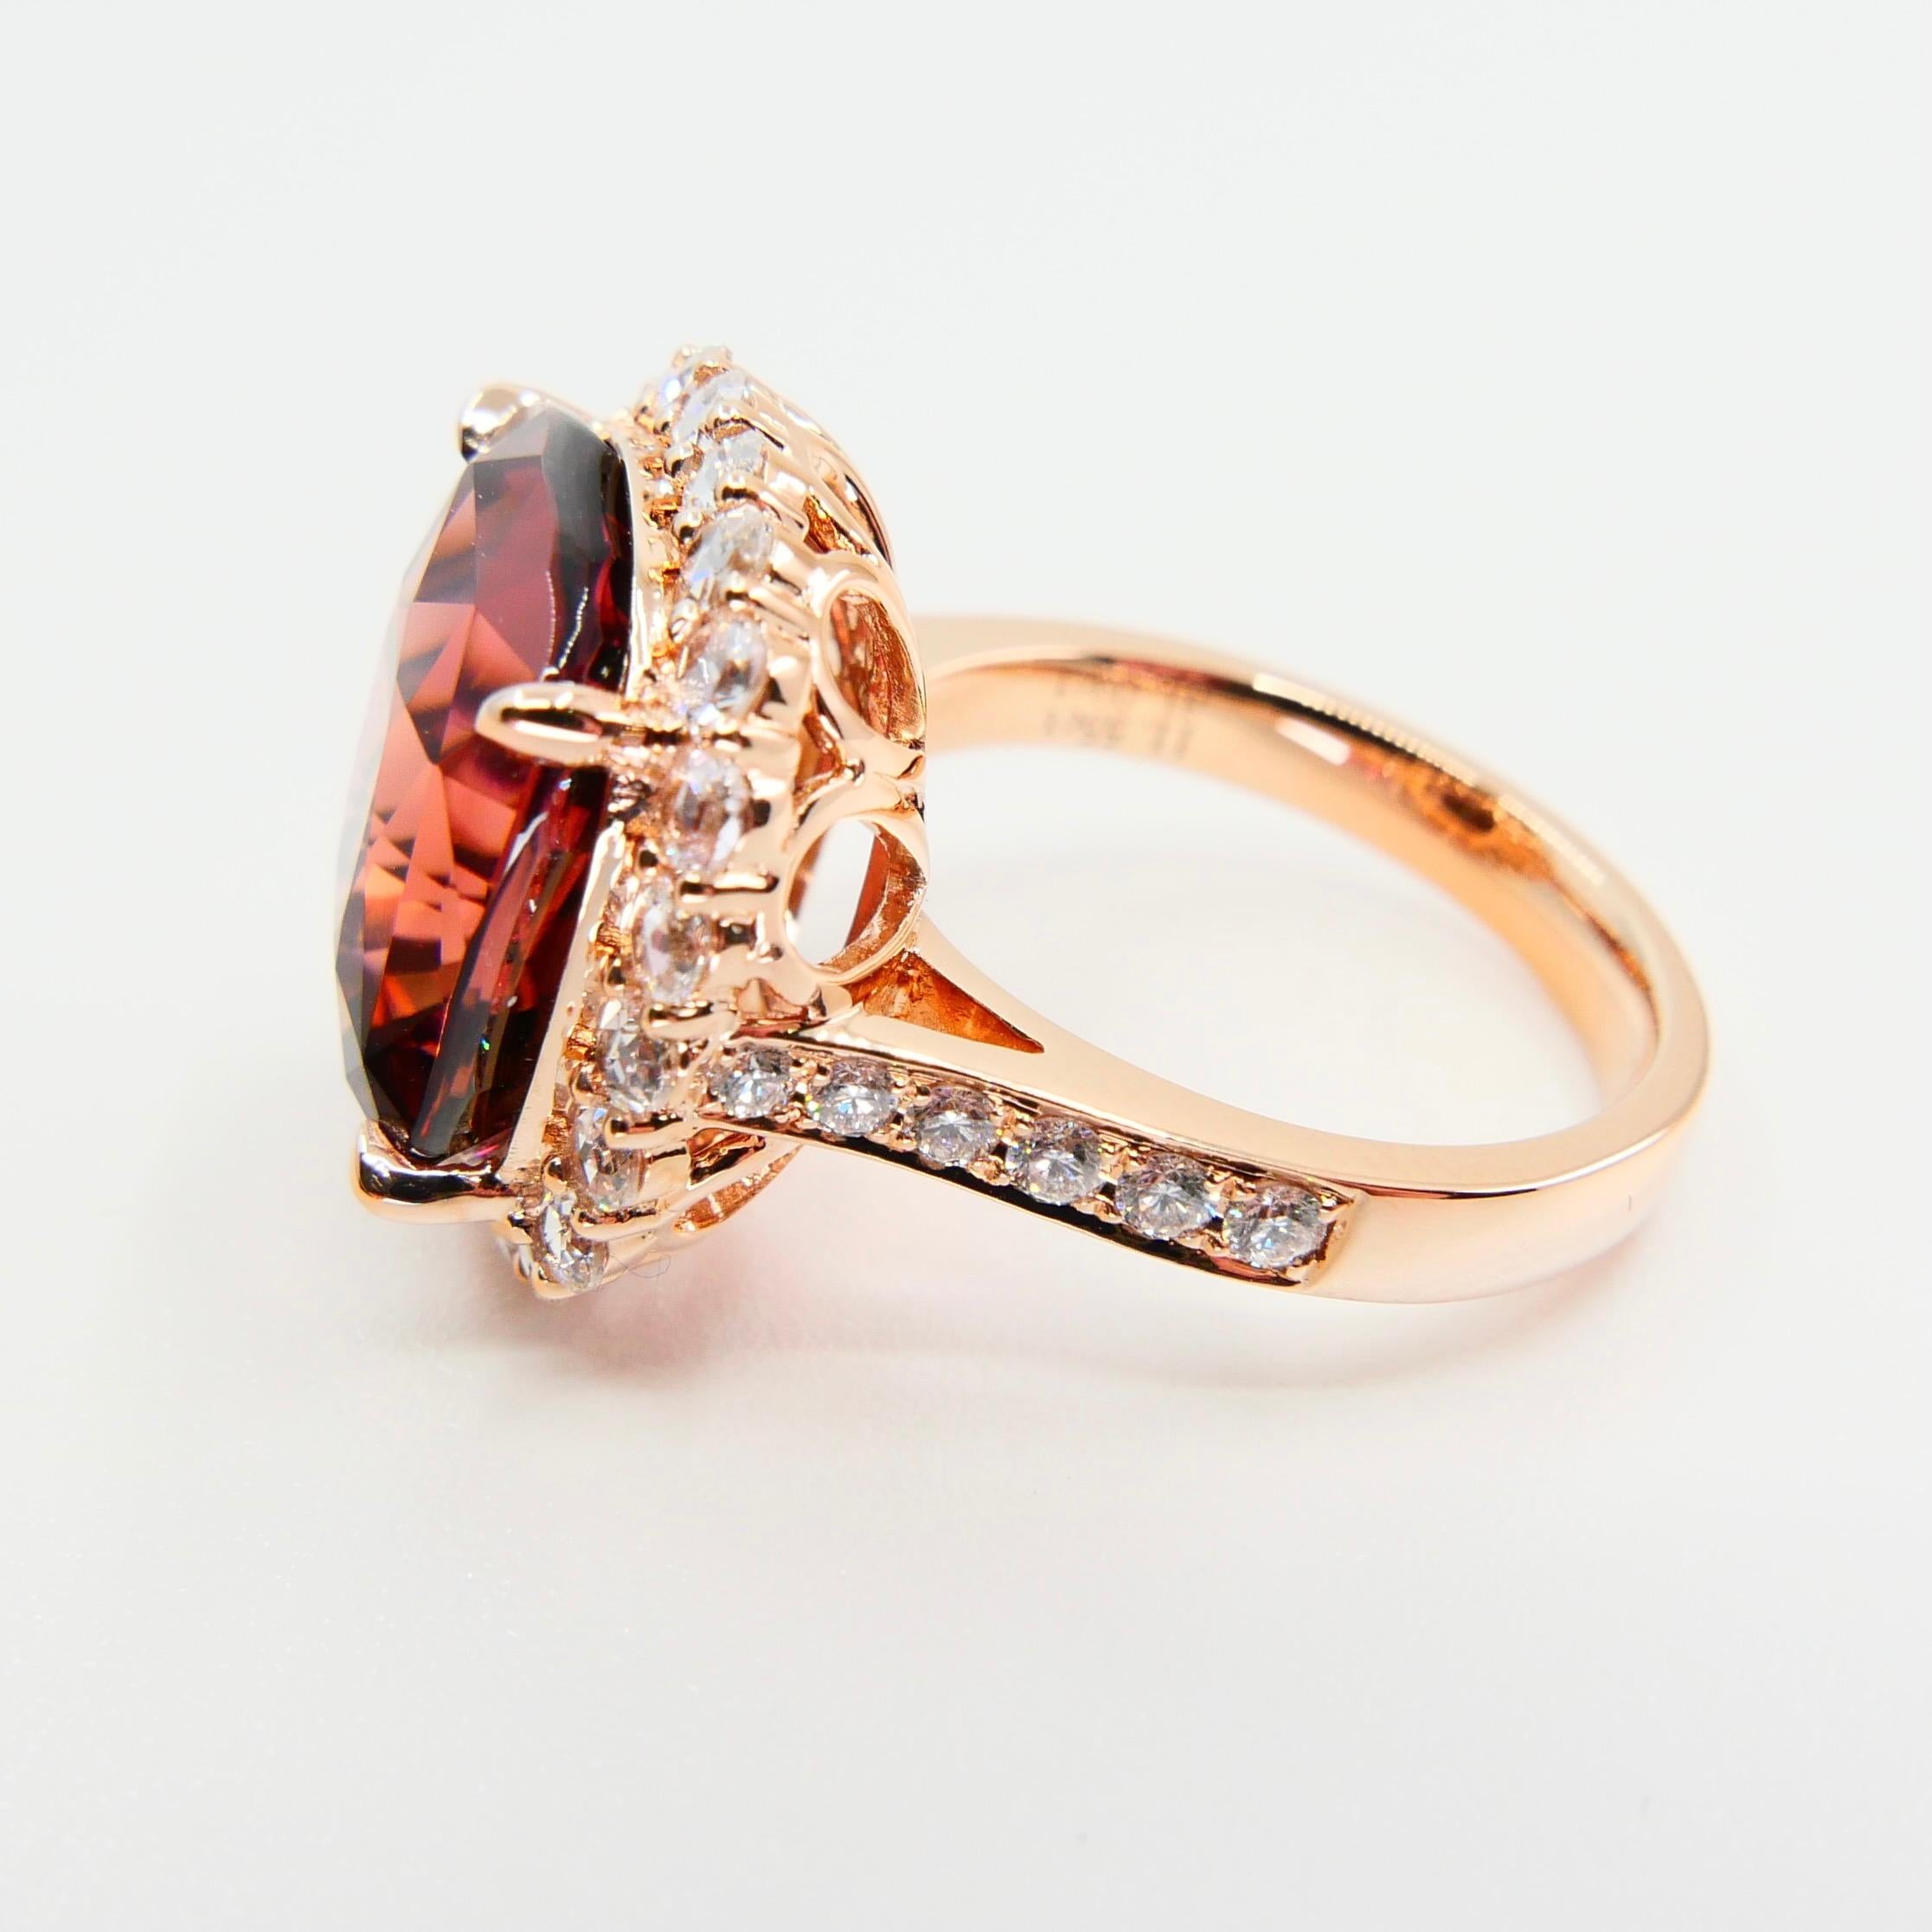 GIA Certified 11.55 Cts Orange Pink Tourmaline & Rose Cut Diamond Cocktail Ring For Sale 1